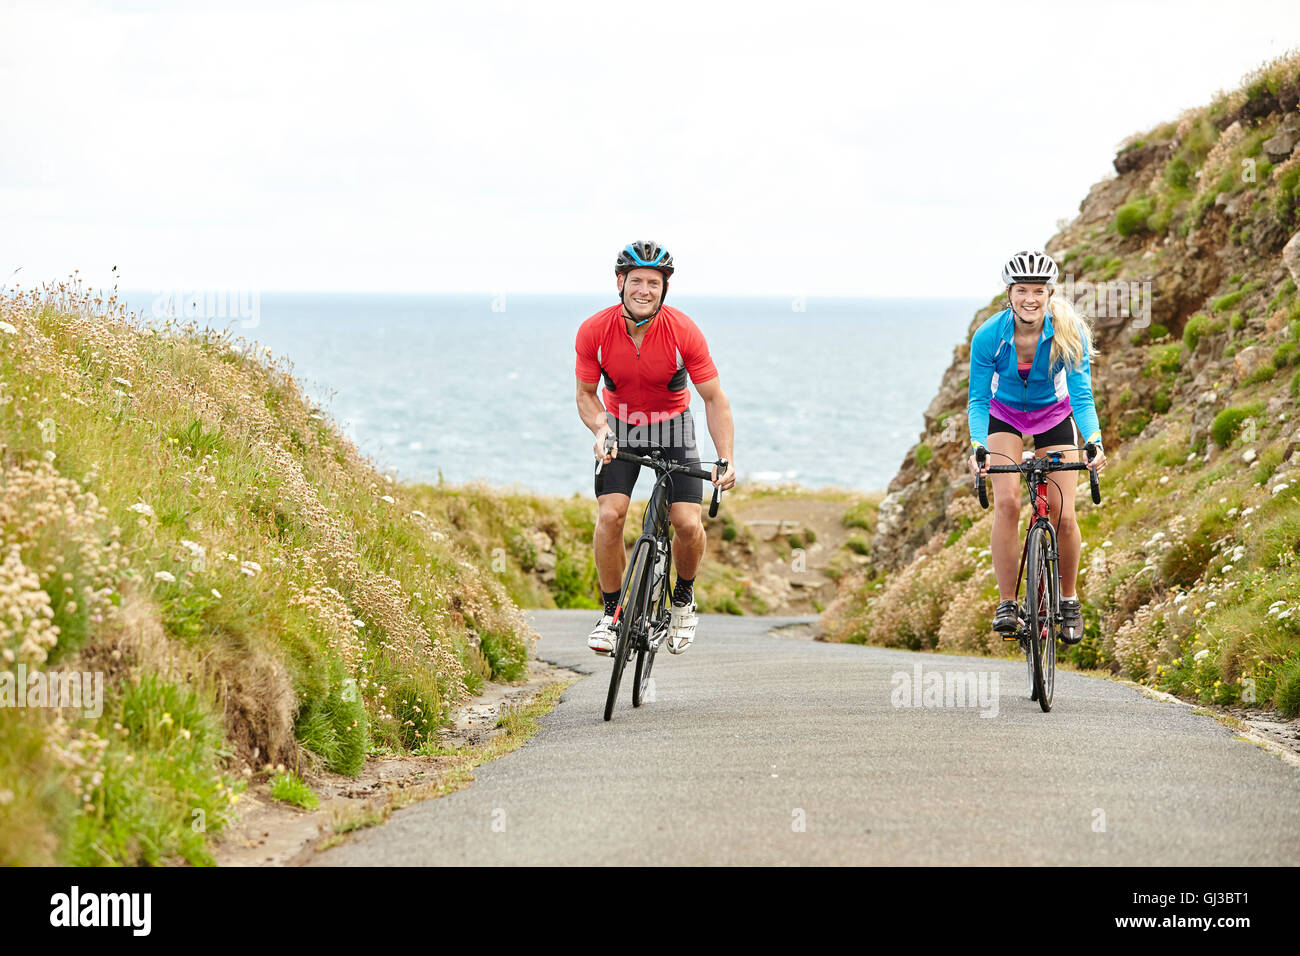 Cyclists riding on road overlooking ocean Stock Photo